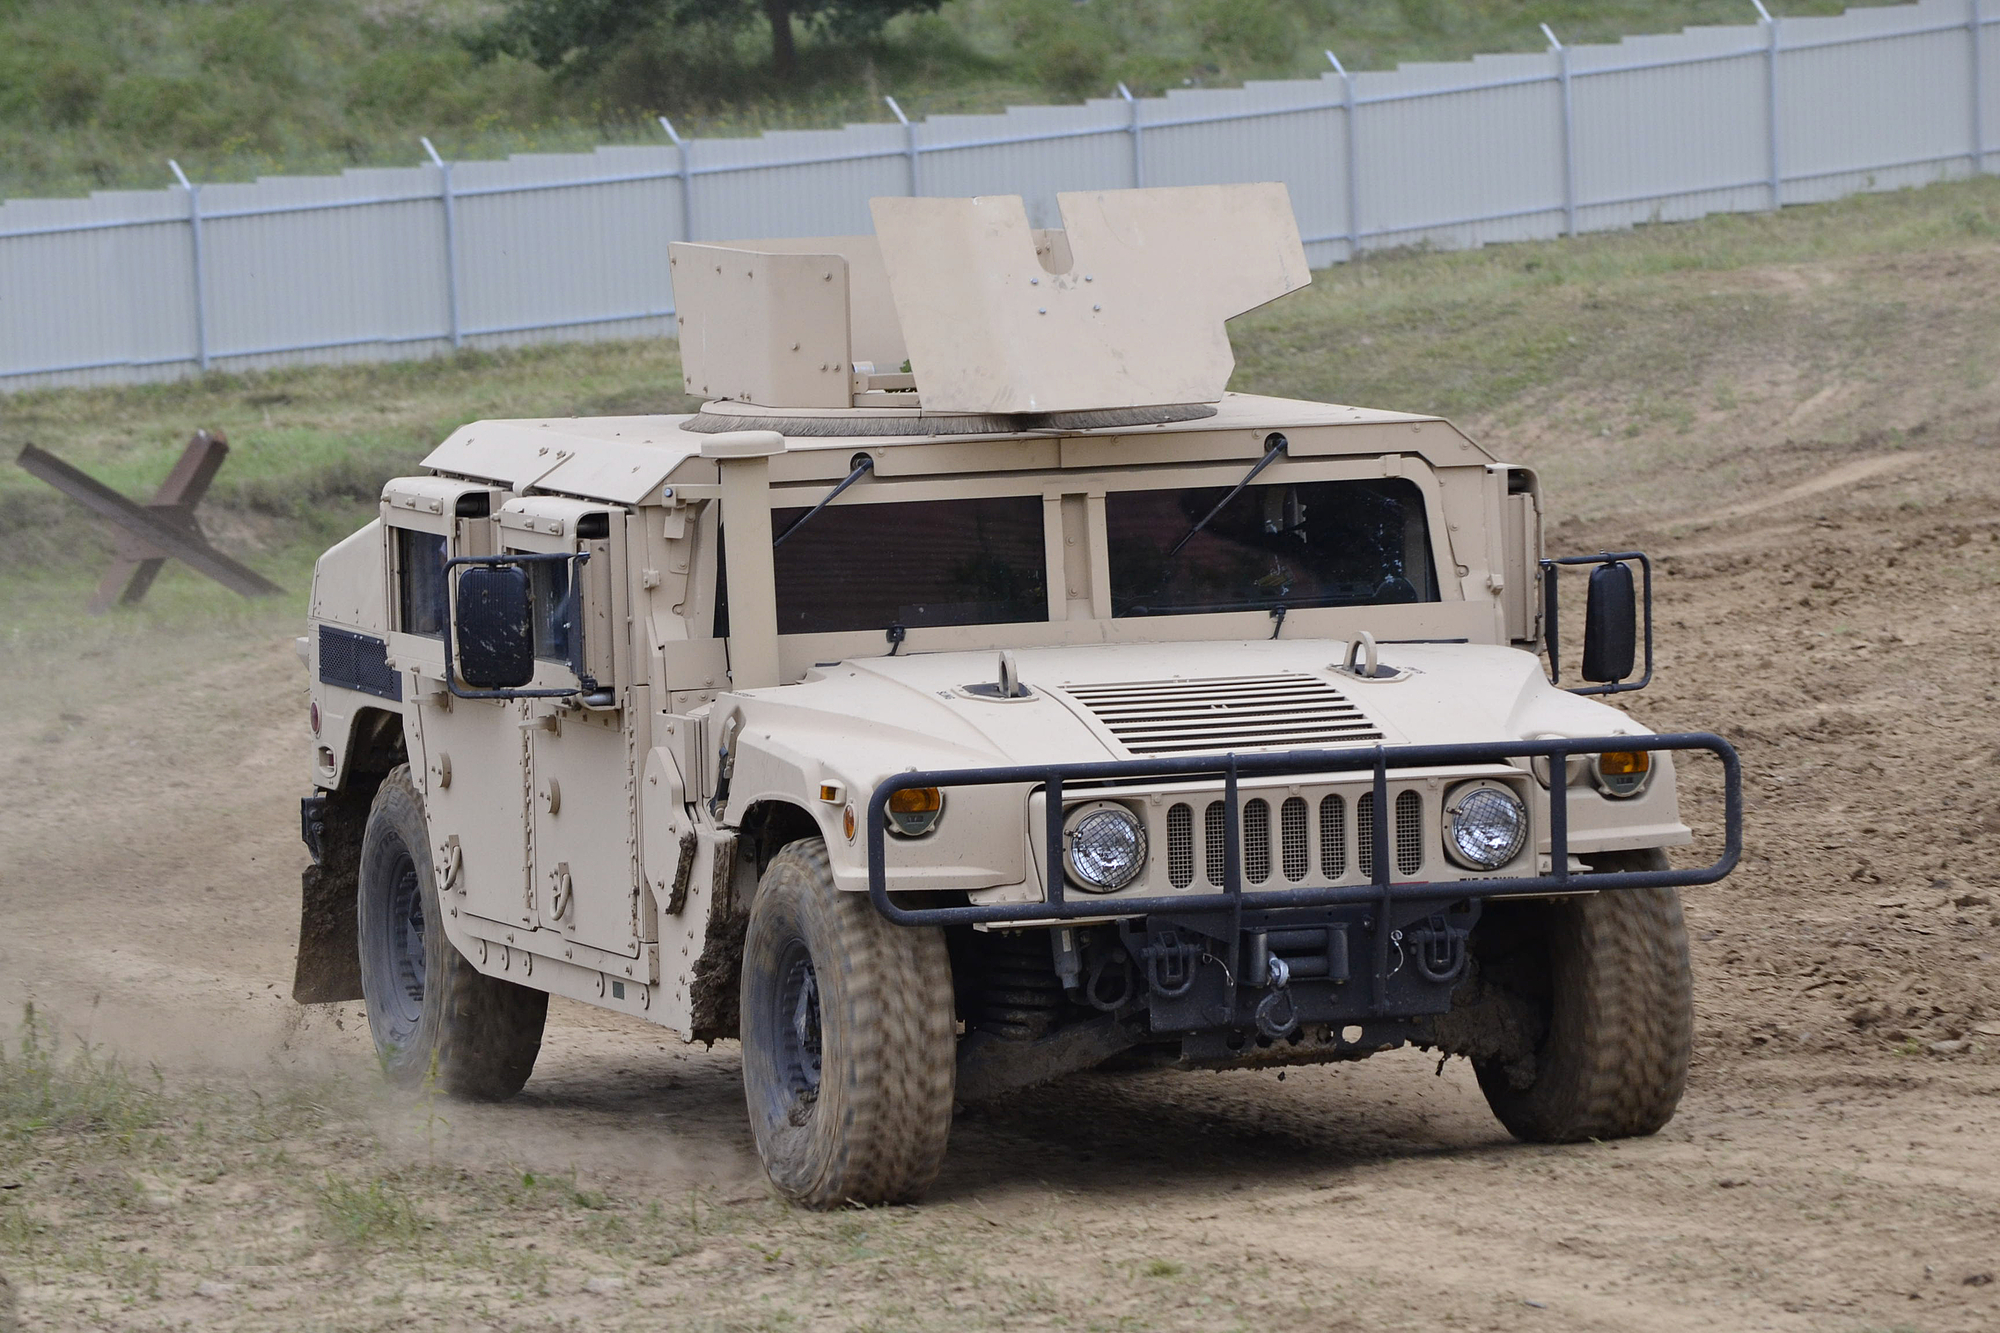 Bulletproof Hummer of USA army, vehicle with bulletproof car glass